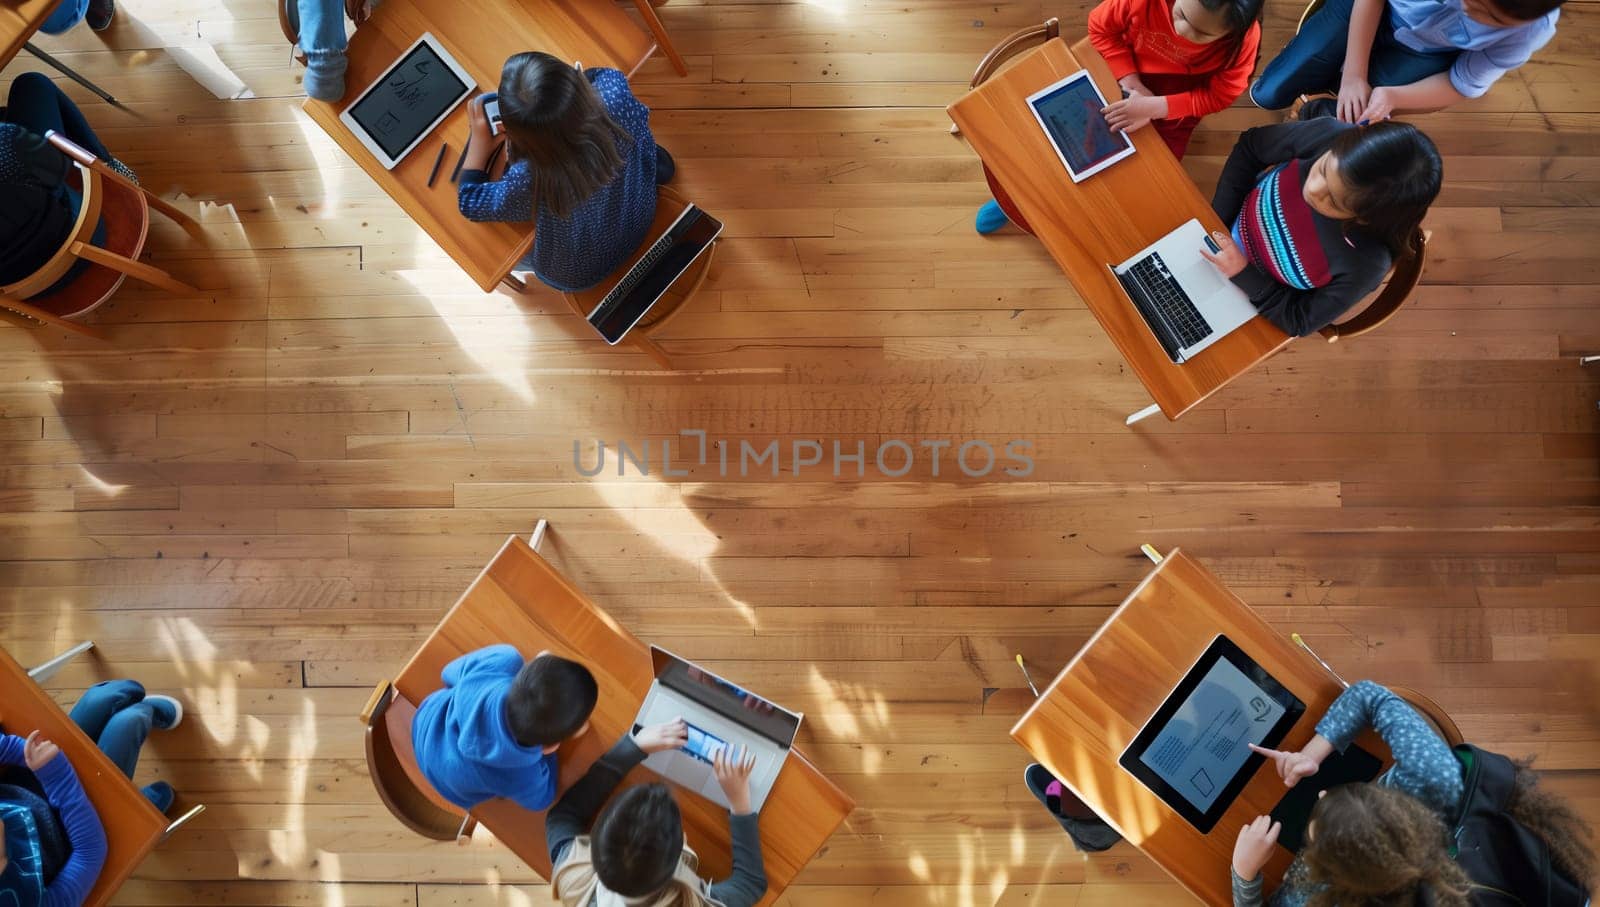 Individuals seated at desks in a classroom are utilizing laptops and tablets. The room features wooden flooring made of hardwood and stained with varnish